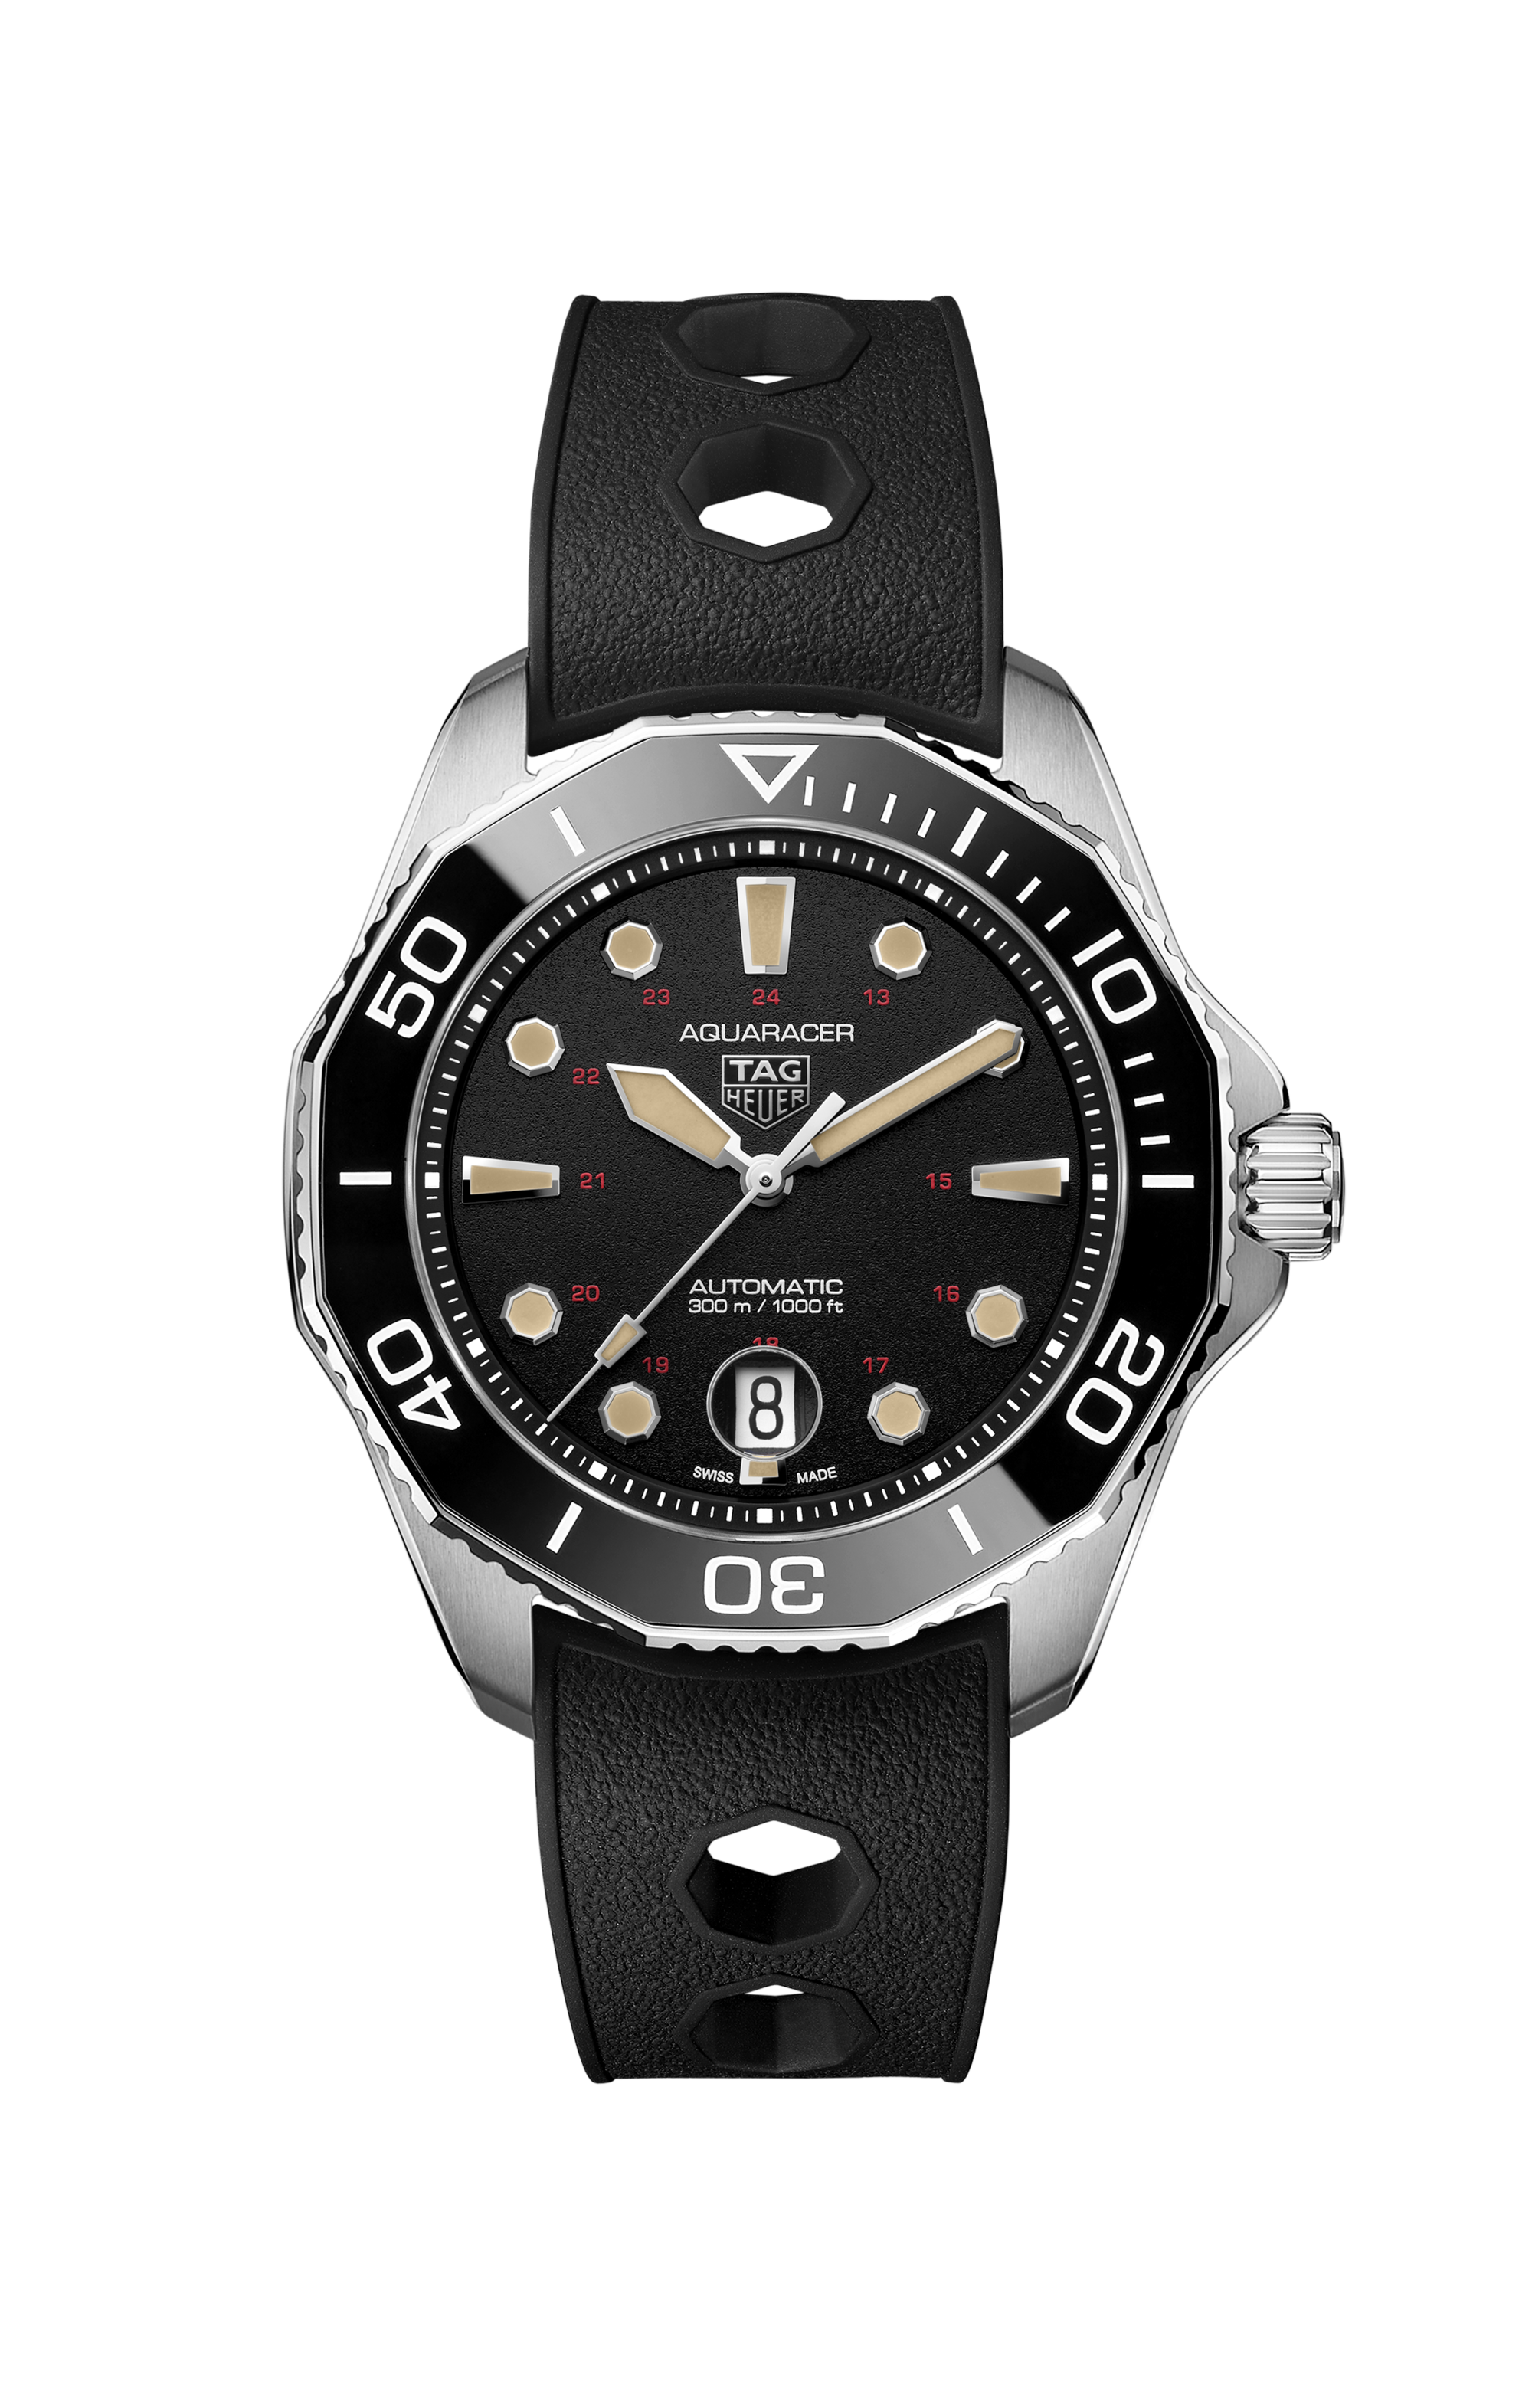 TAG Heuer Monaco CAW211P. FC6356, Baton, 2020, Very Good, Case material Steel, Bracelet material: Leather